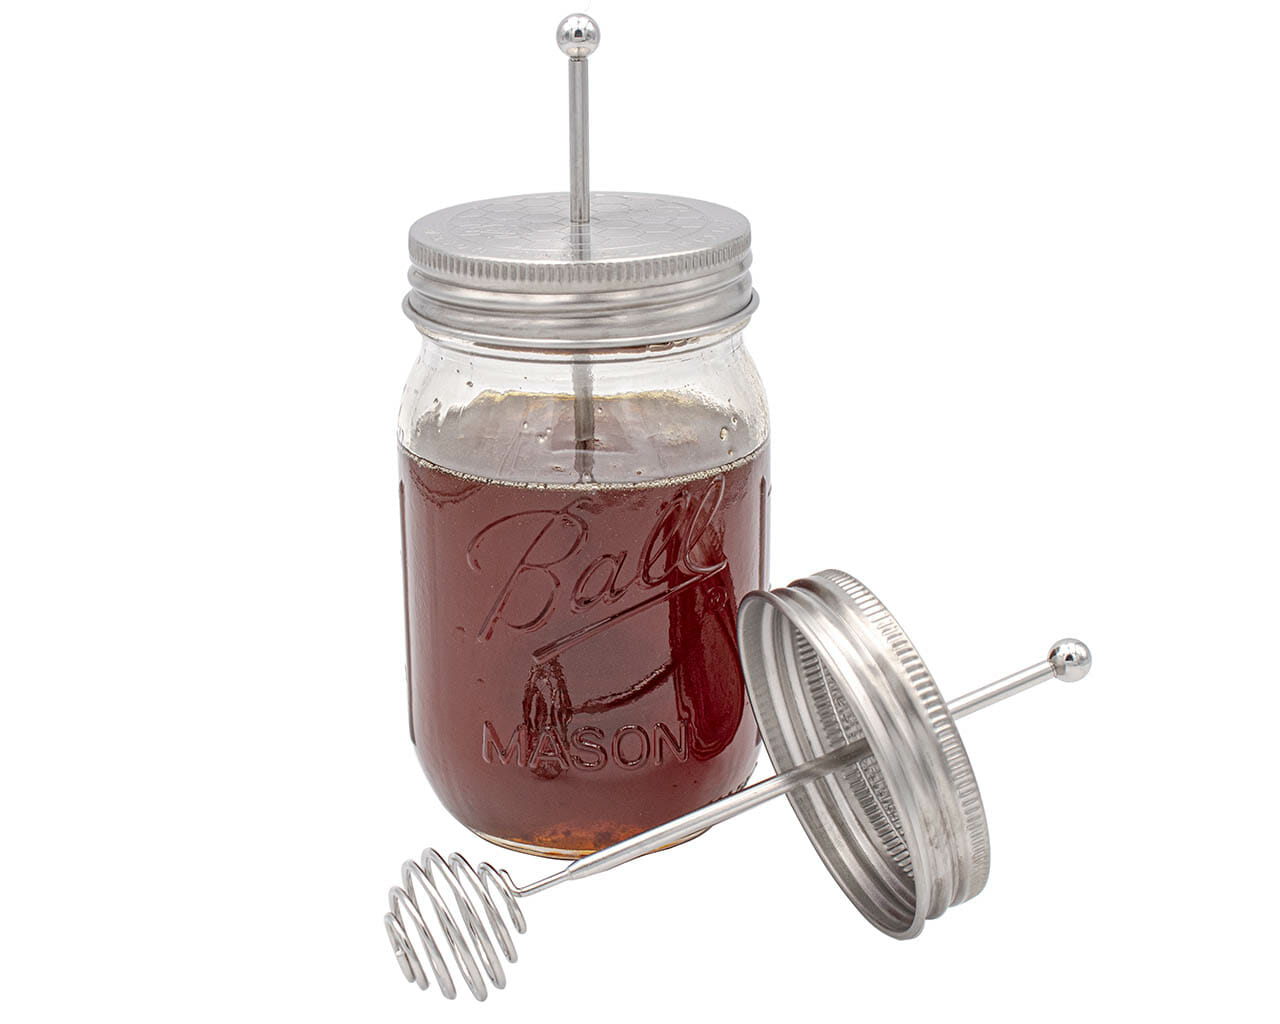 mason-jar-lifestyle-regular-mouth-stainless-steel-honey-dipper-ball-in-out